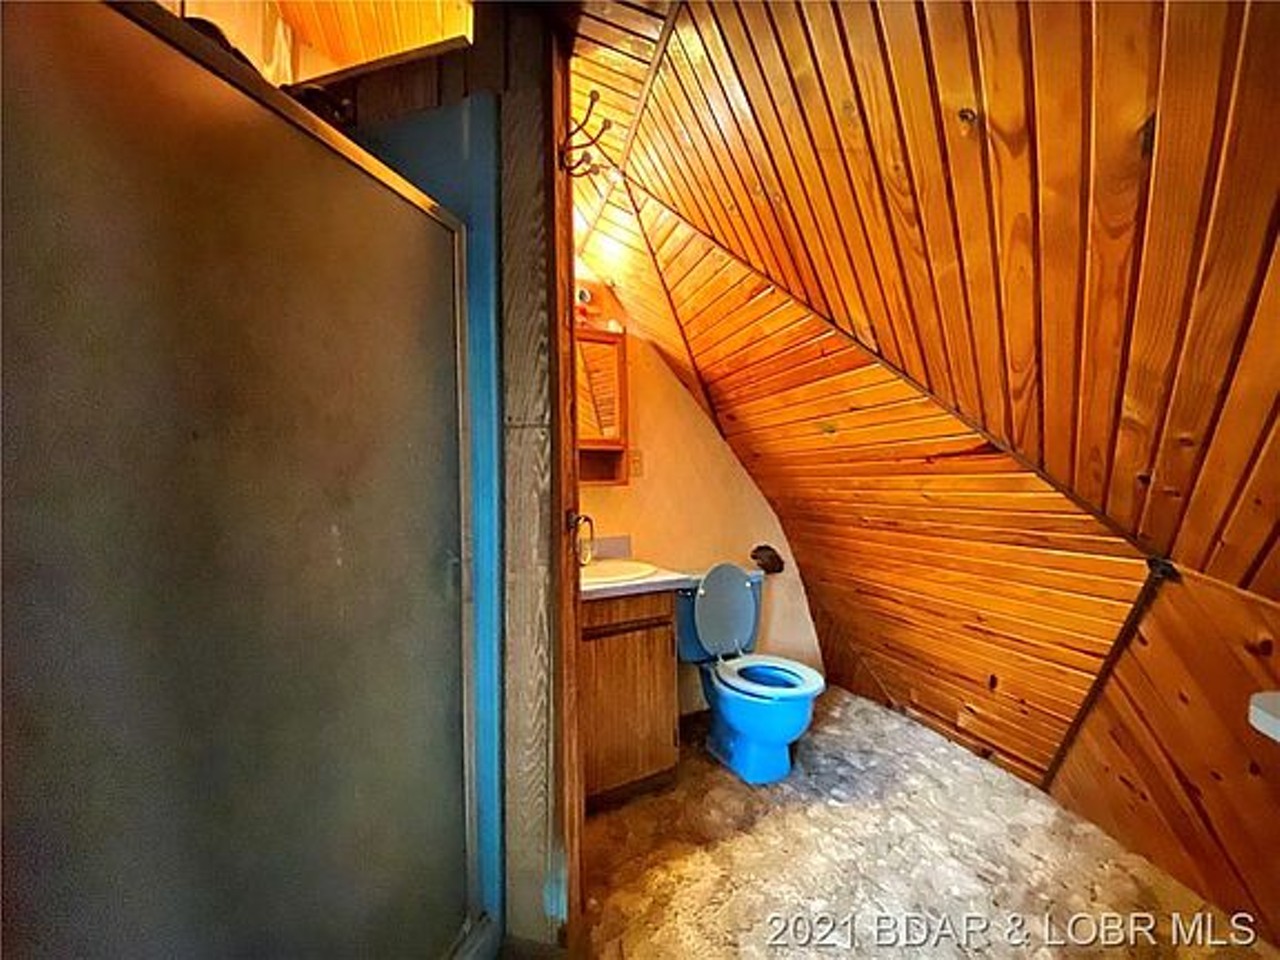 This Geodesic Dome Near the Lake of the Ozarks Has a Camouflage Bathroom [PHOTOS]